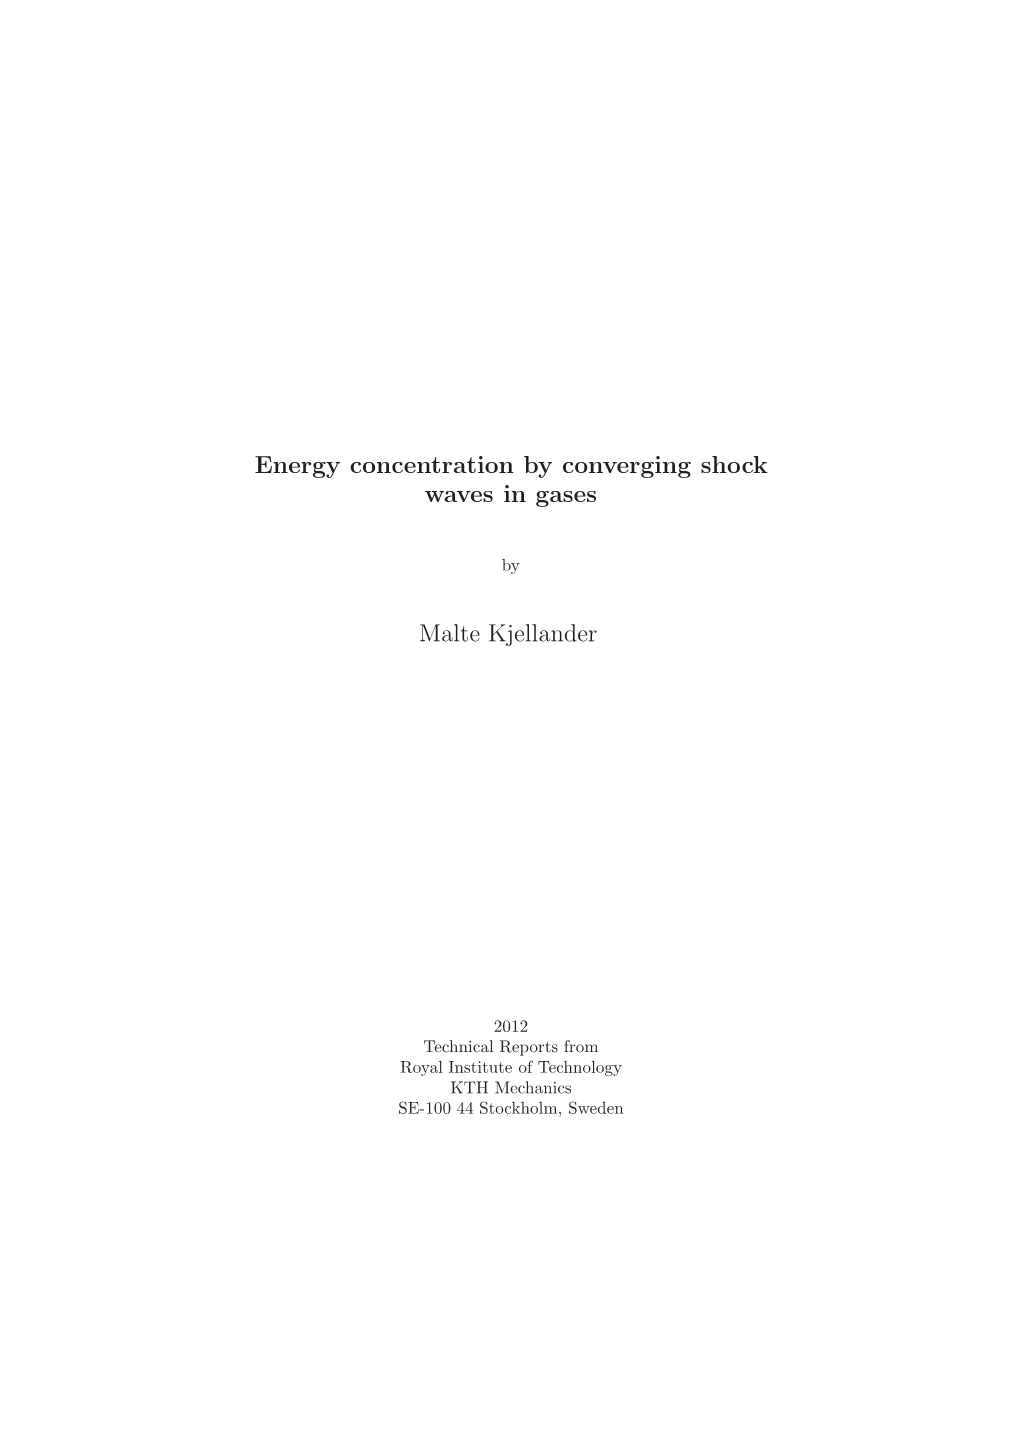 Energy Concentration by Converging Shock Waves in Gases Malte